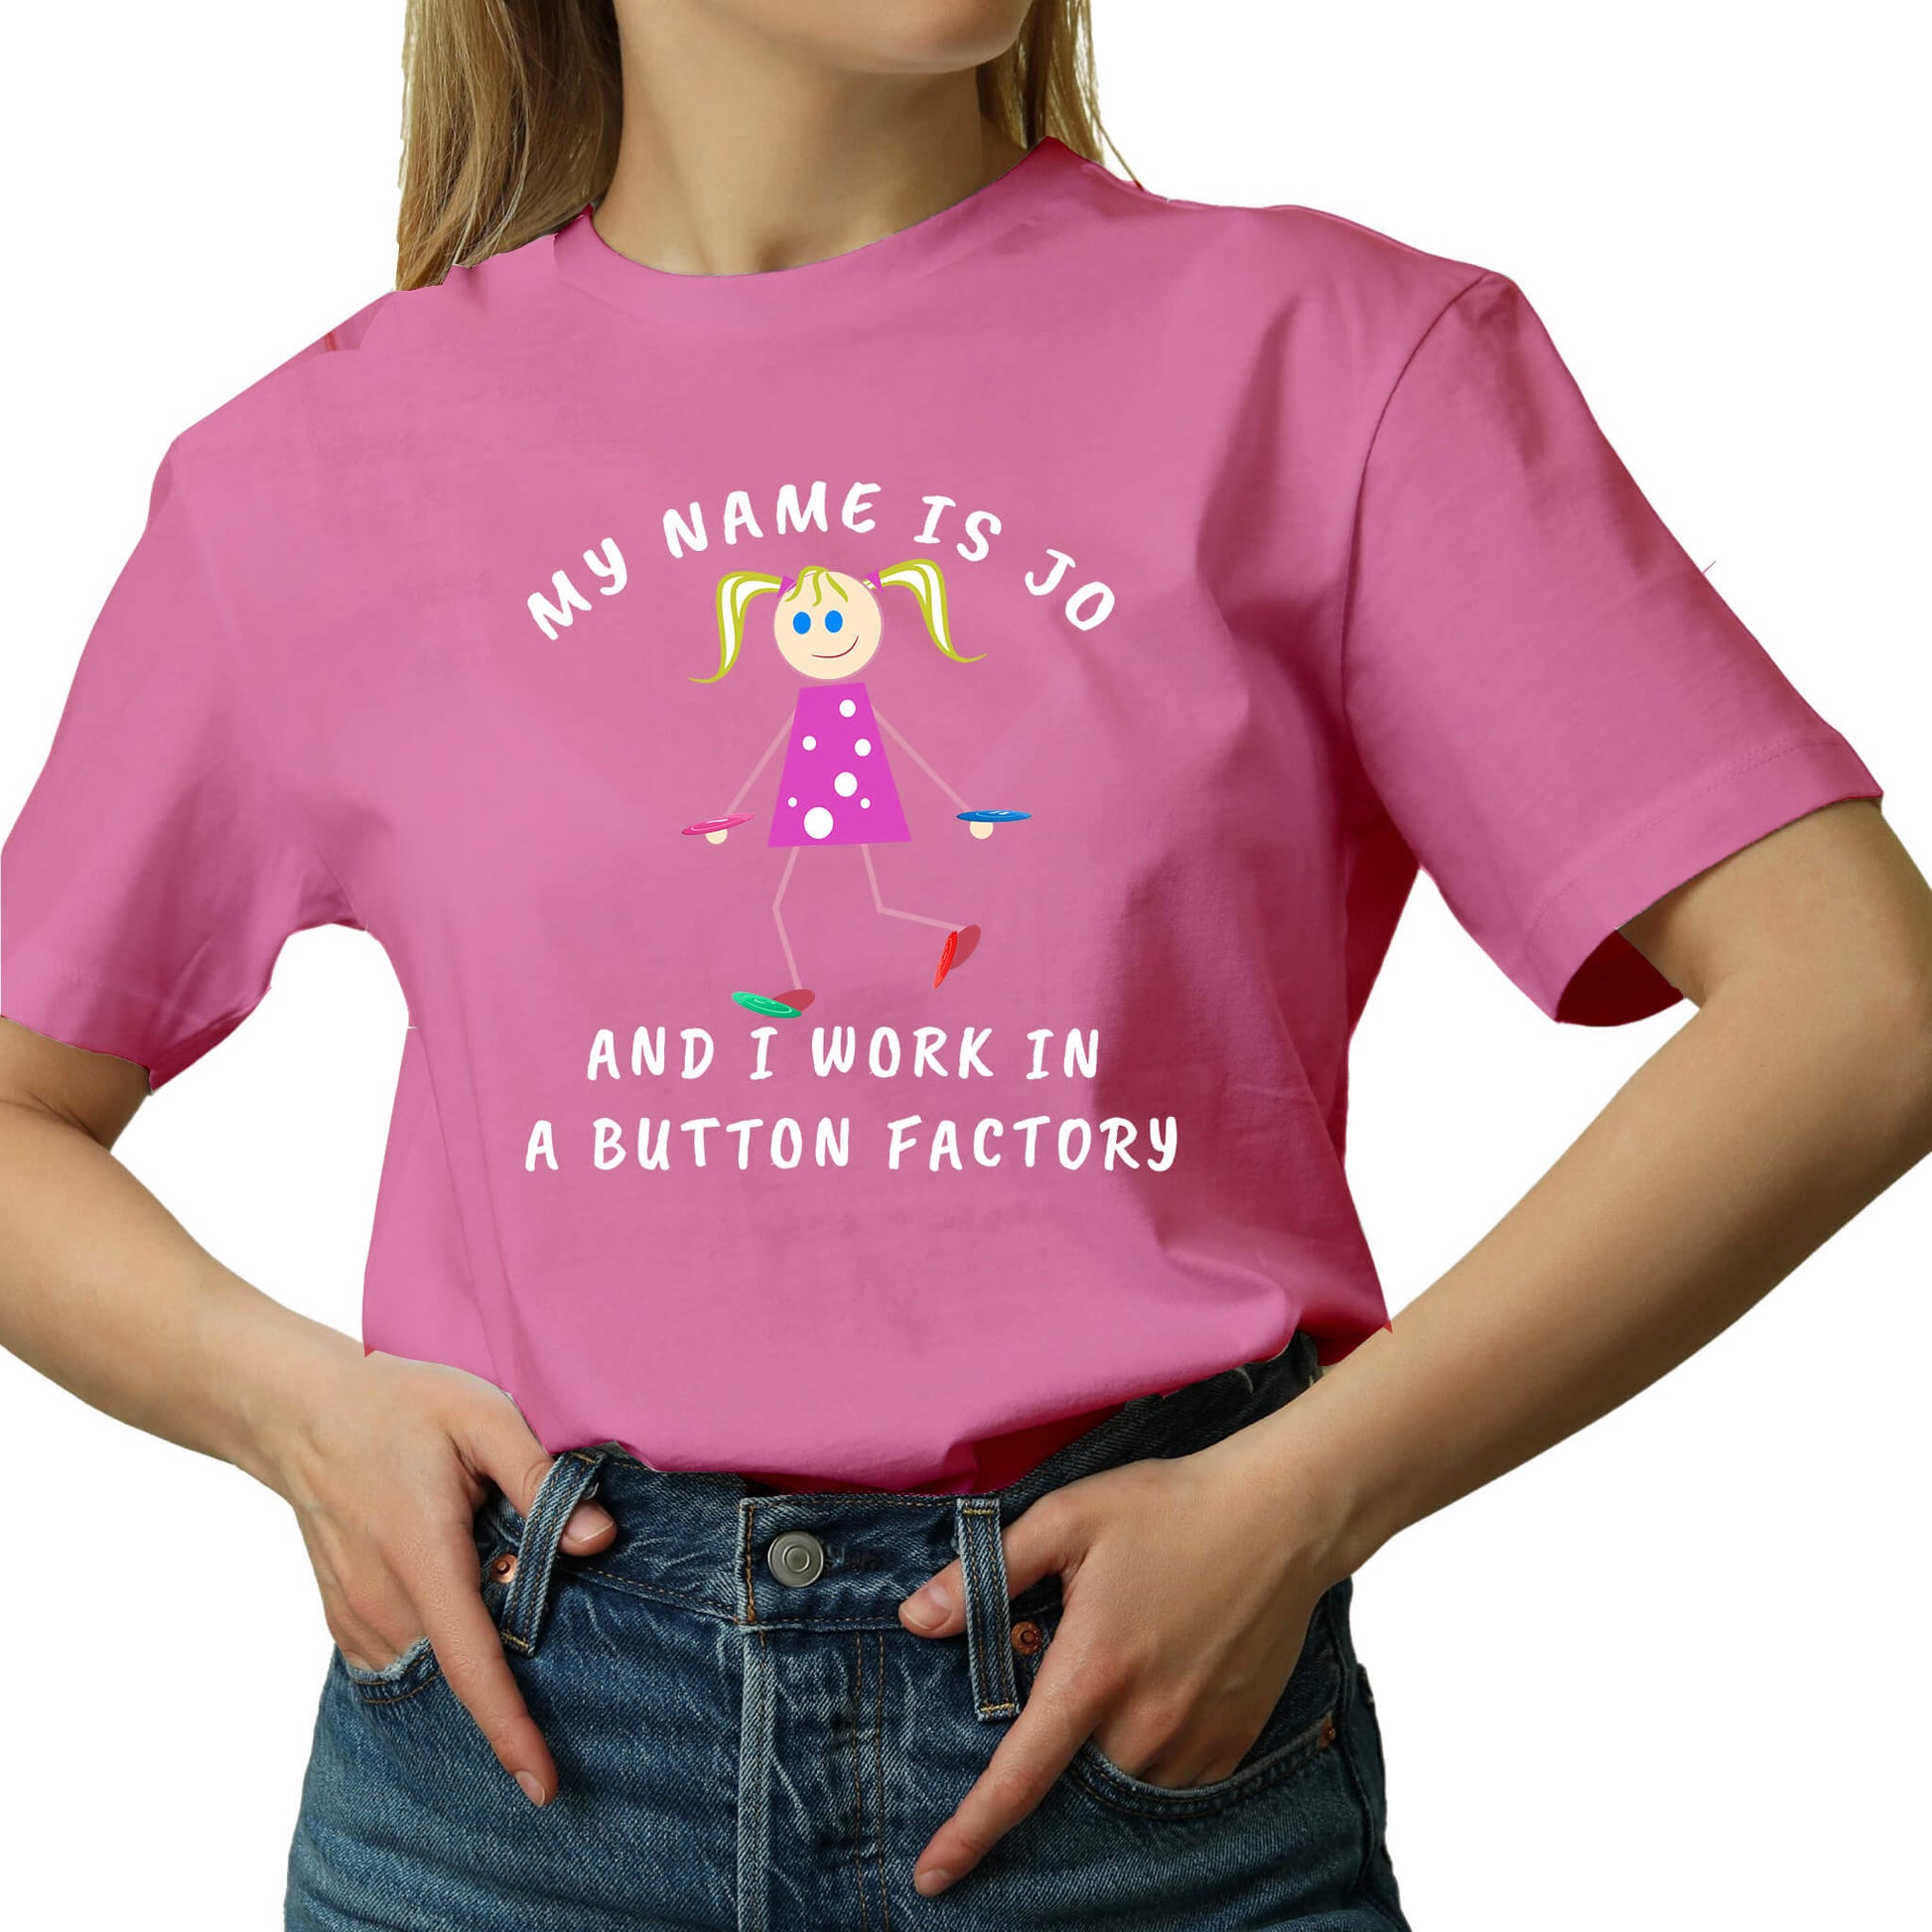 MY NAME IS JO AND I WORK IN A BUTTON FACTORY T-SHIRT pink